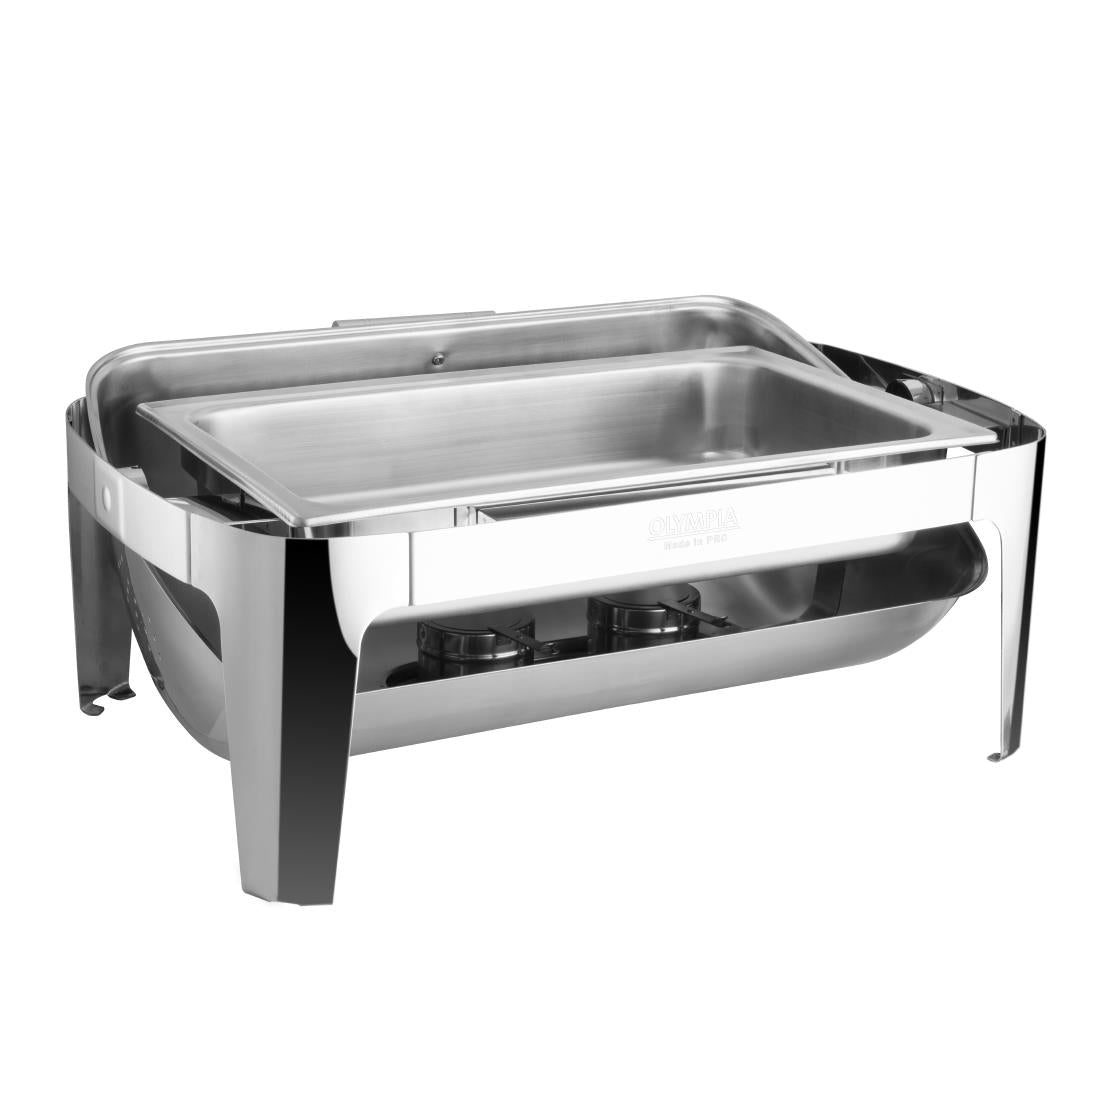 Olympia Madrid Roll Top Chafing Dish